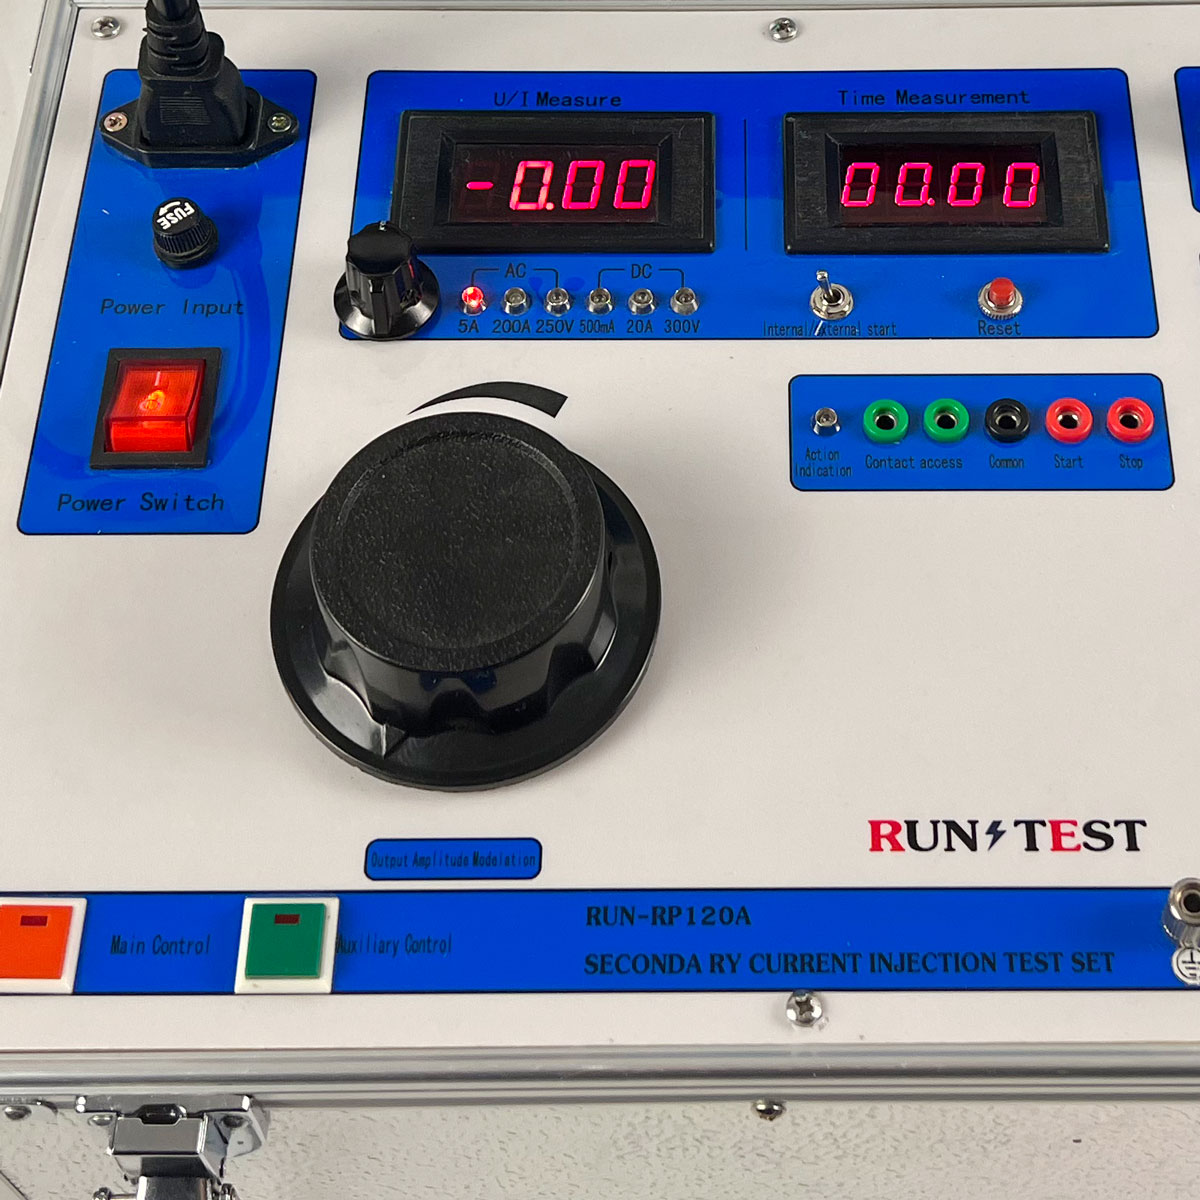 relay protection tester